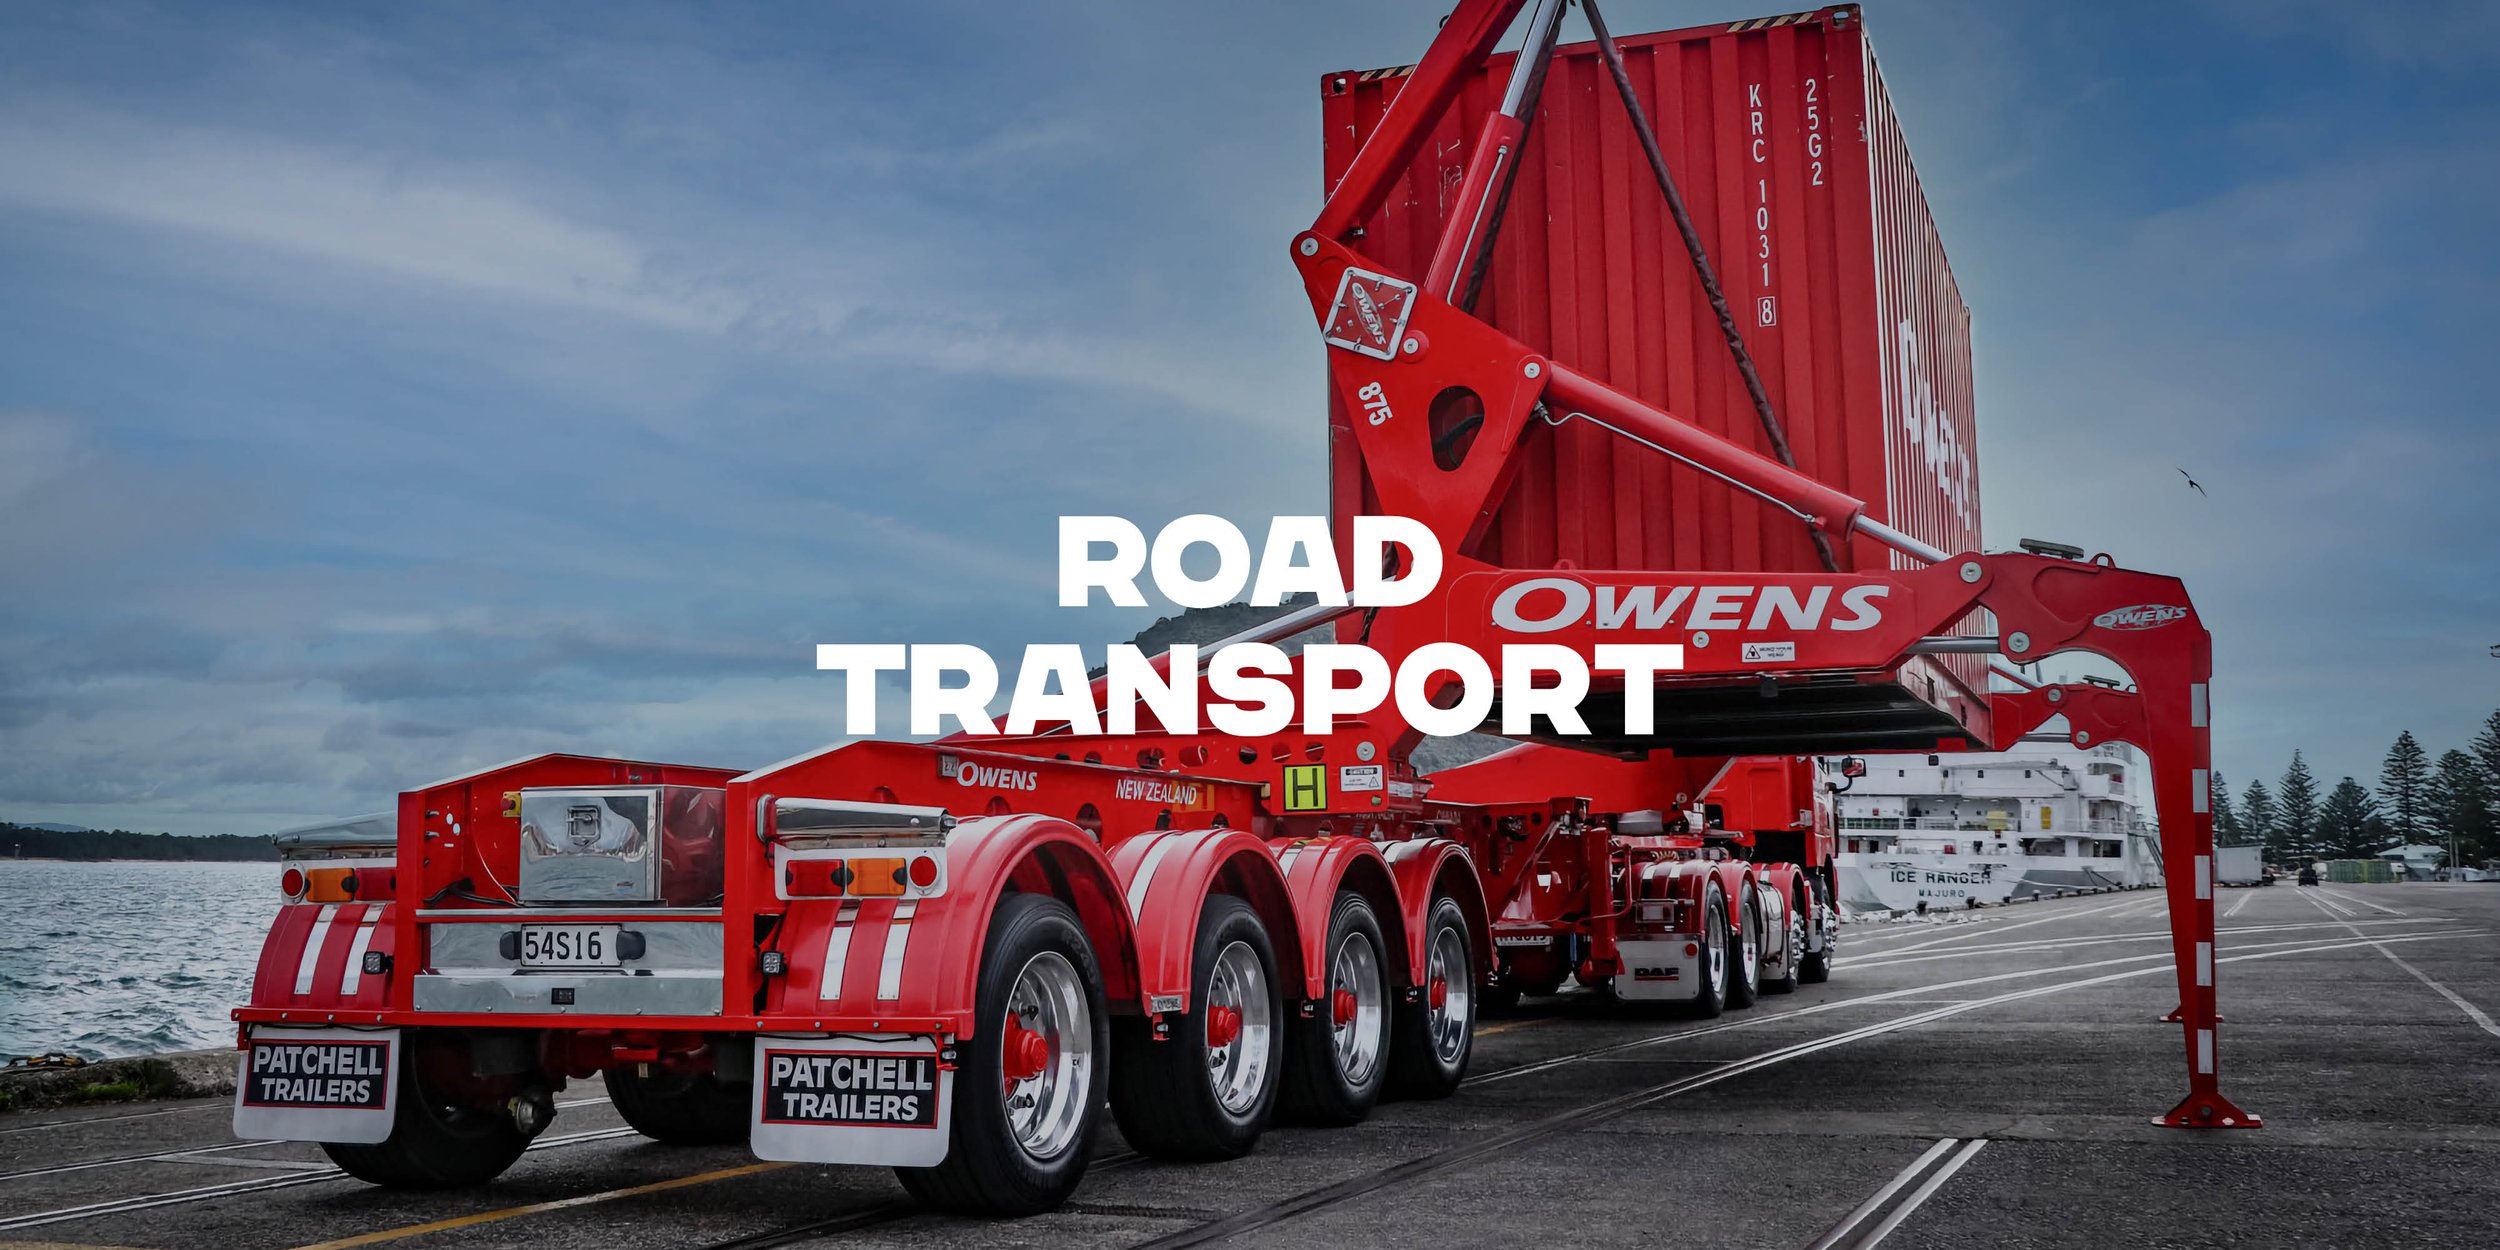 Road Transport industry serviced by Real Steel